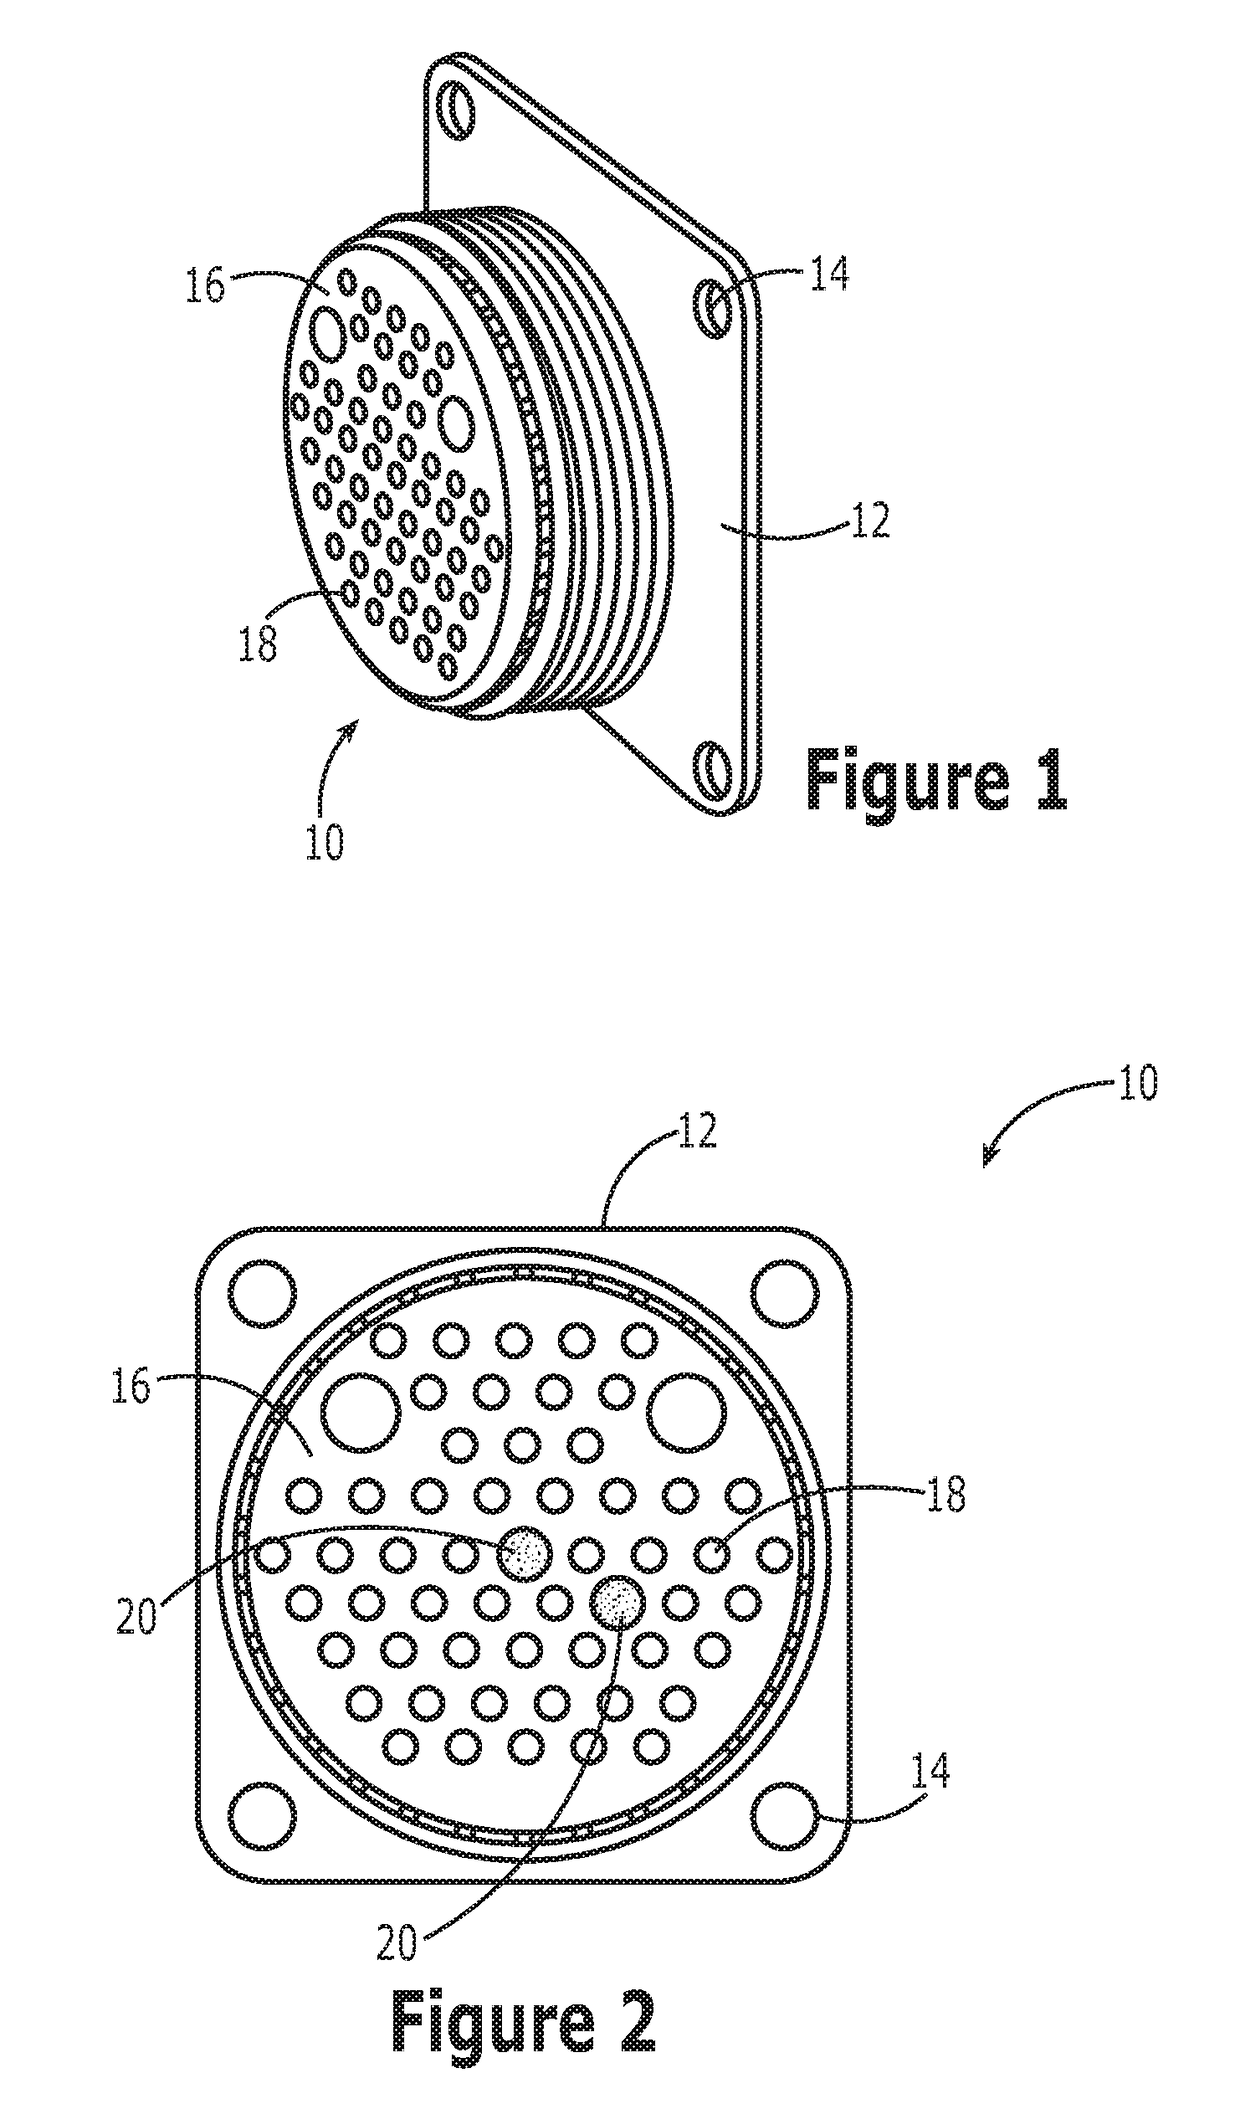 Method and system for identifying wire contact insertion holes of a connector